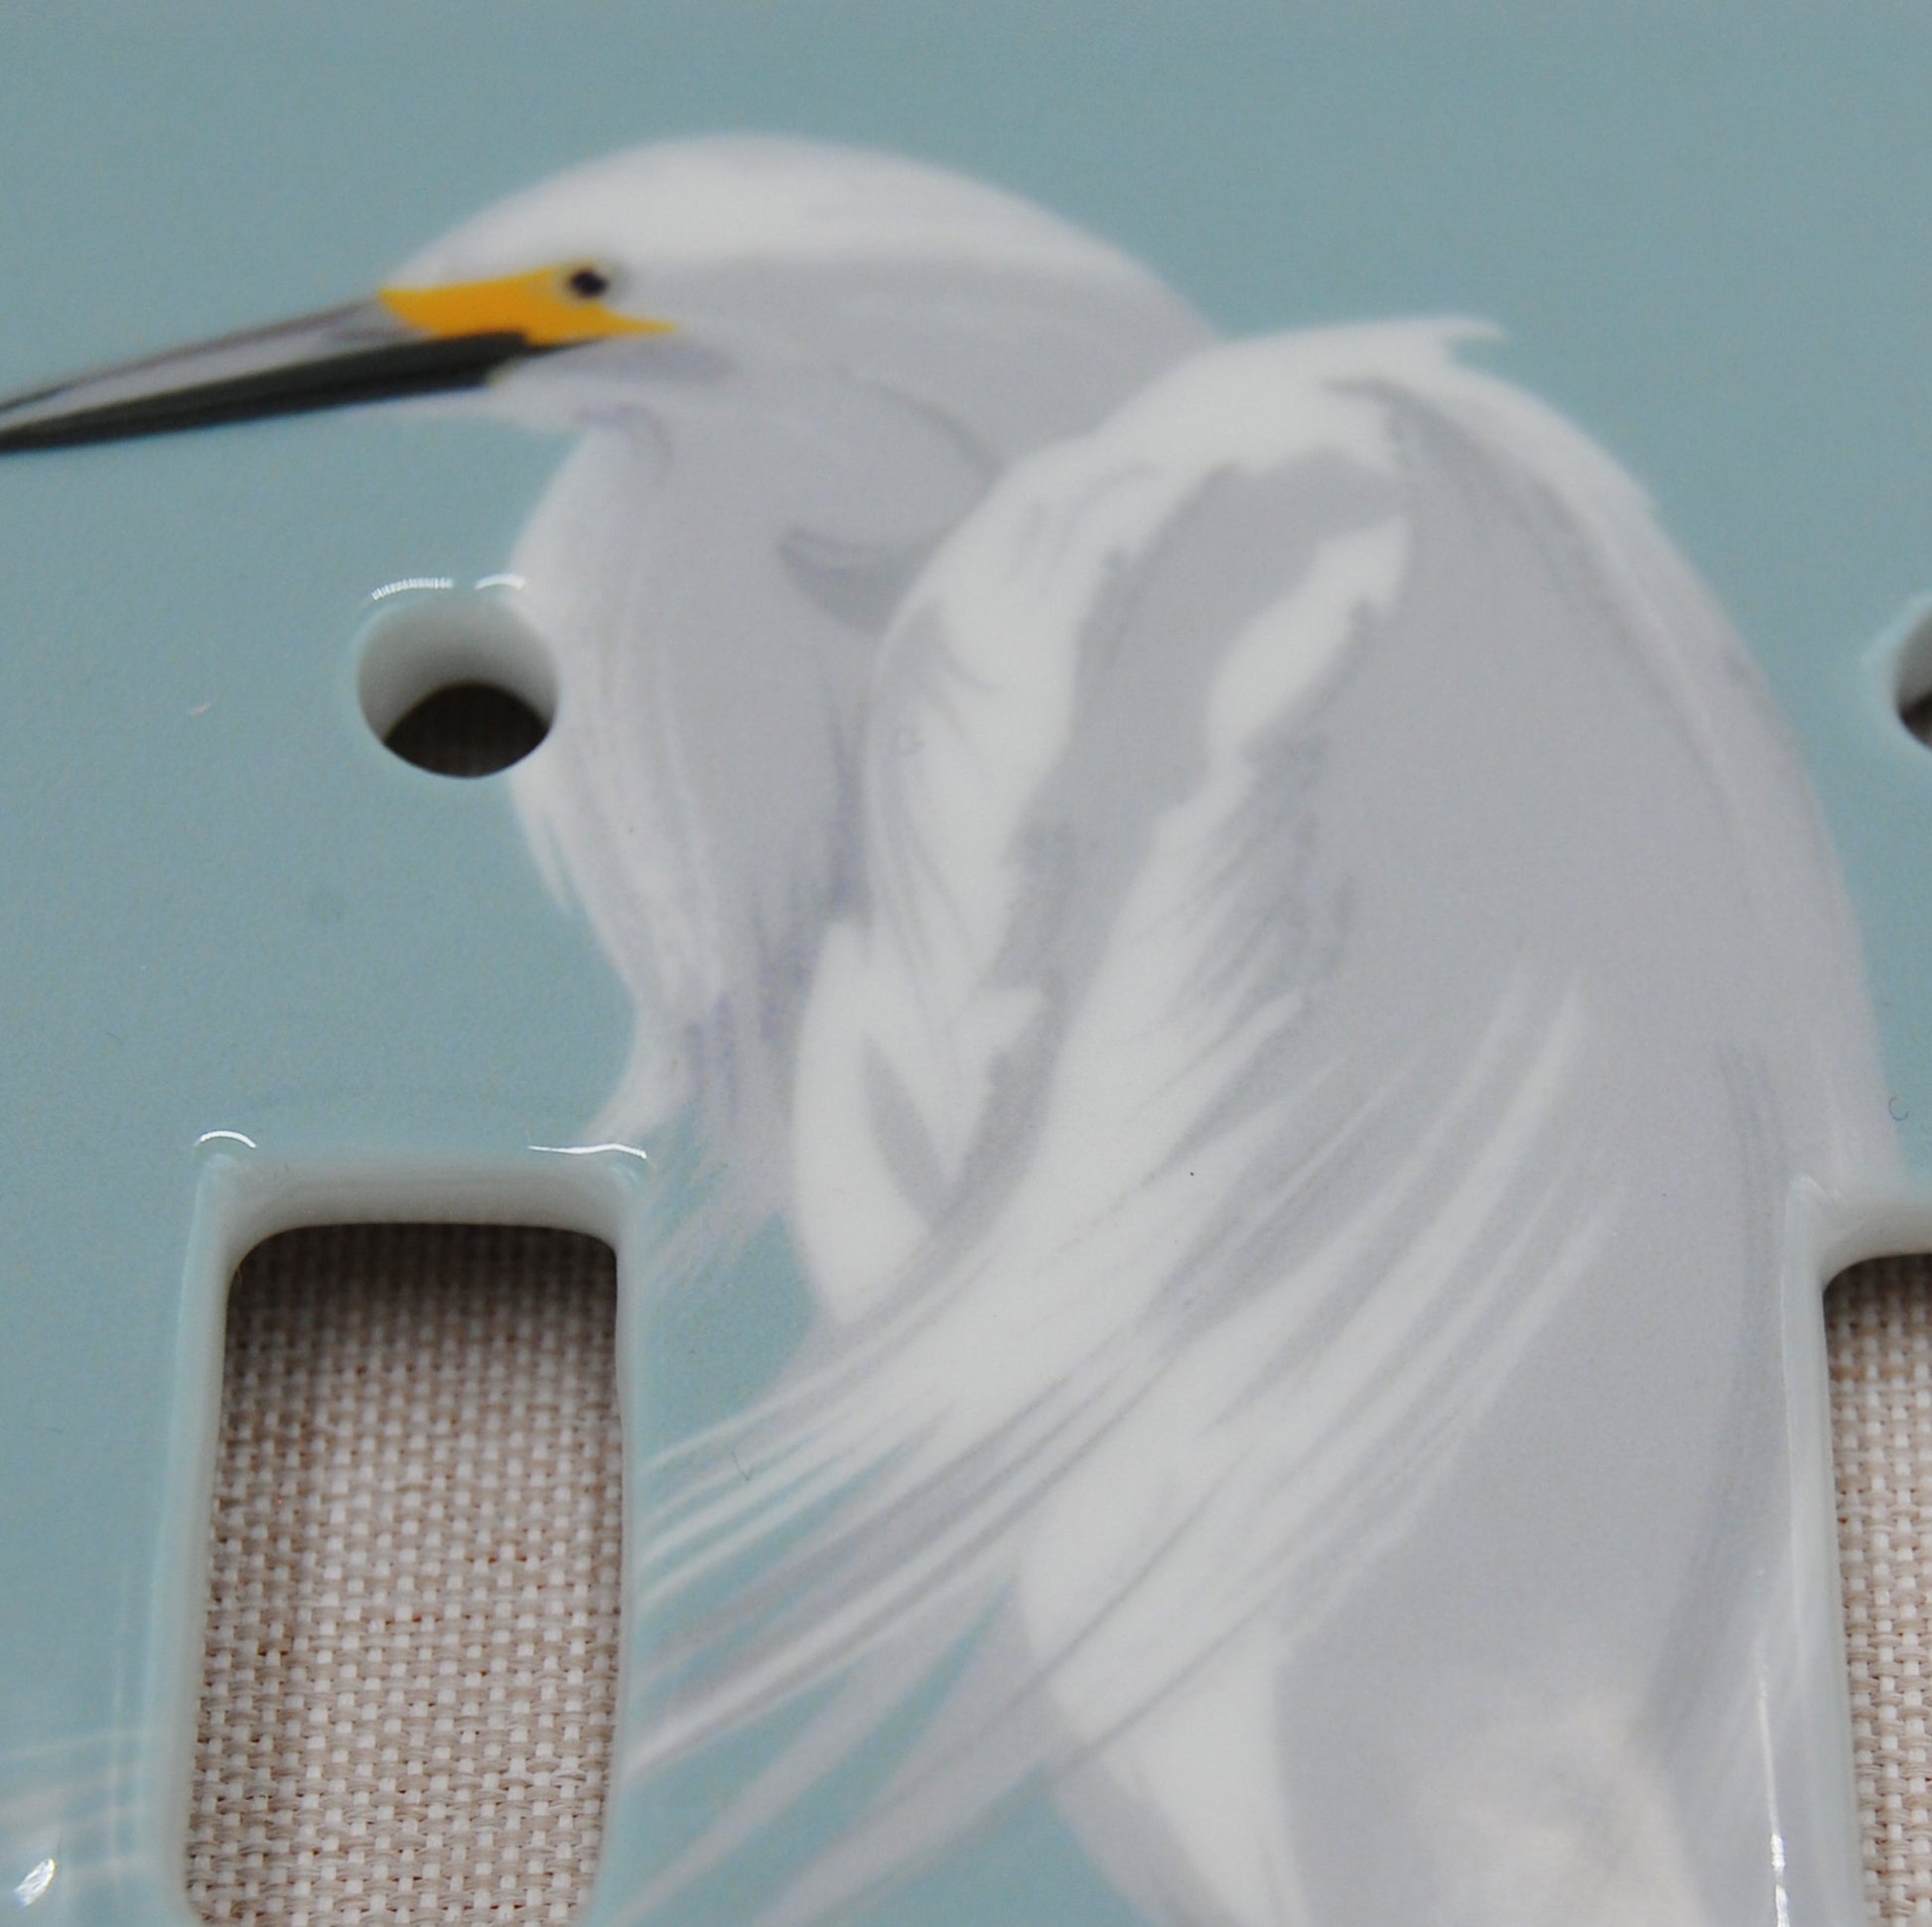 Detail shot of the White Egret Switch Plate.